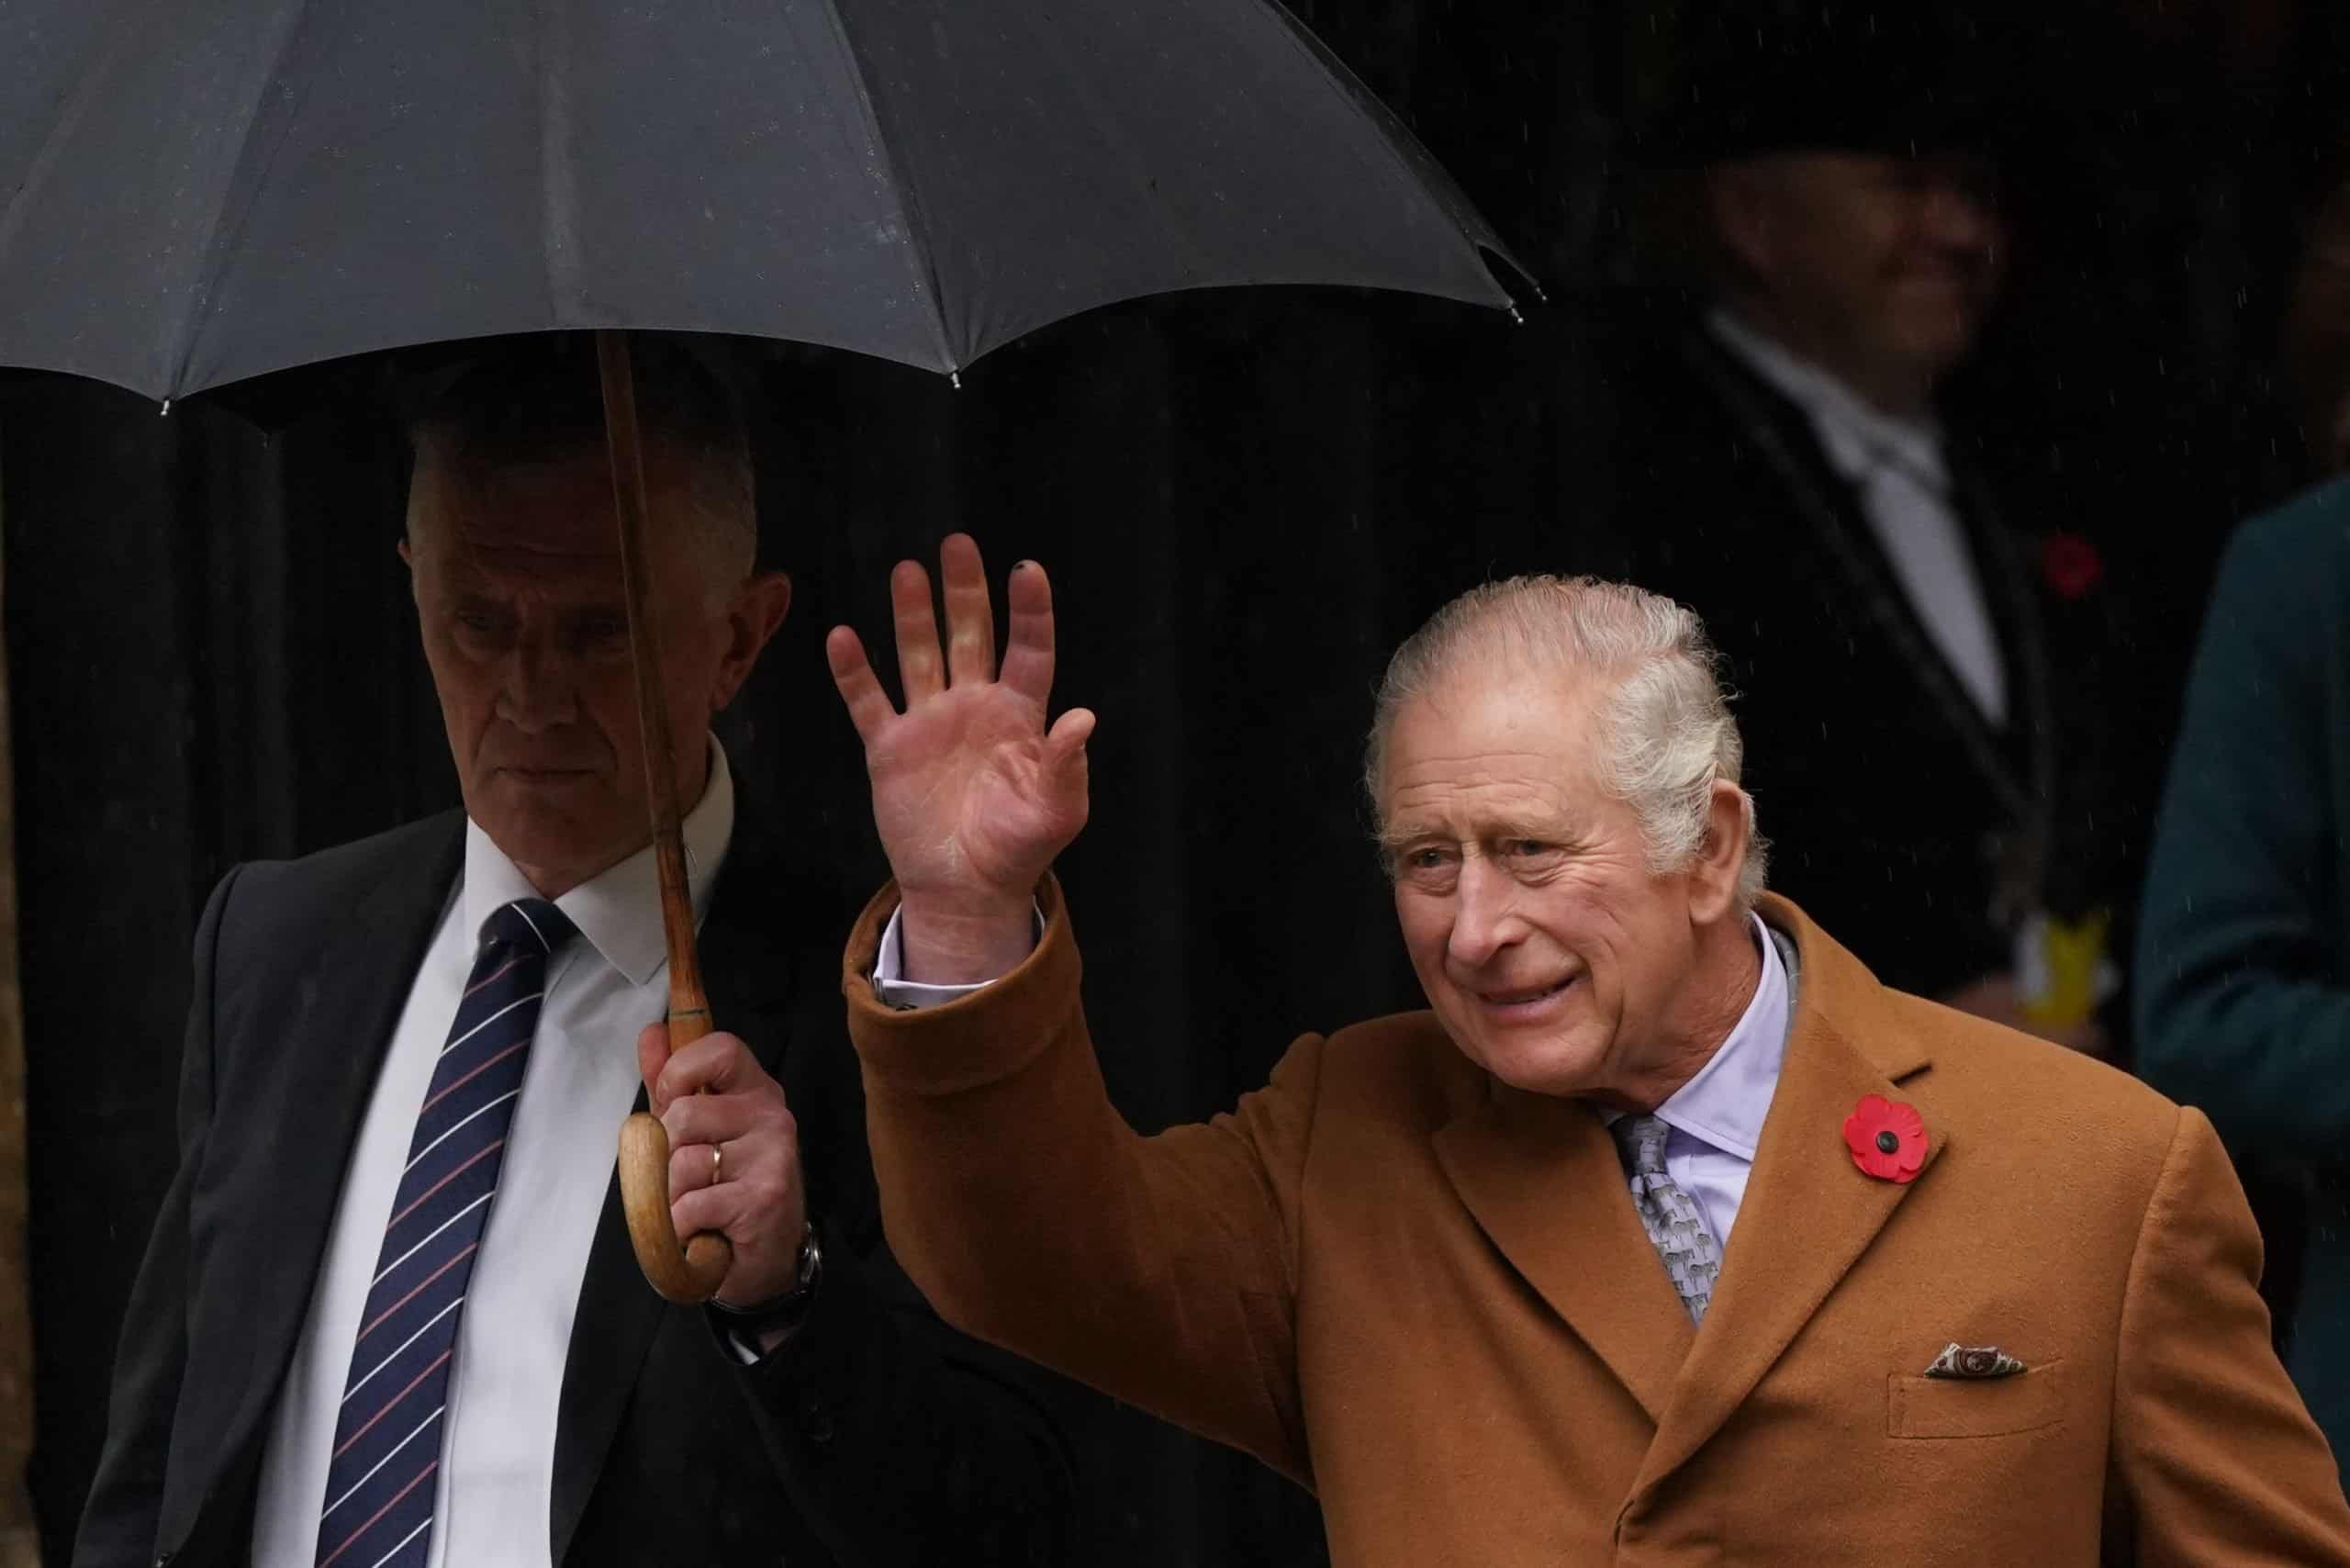 King Charles to pay staff cost of living bonus ‘out of his own pocket’